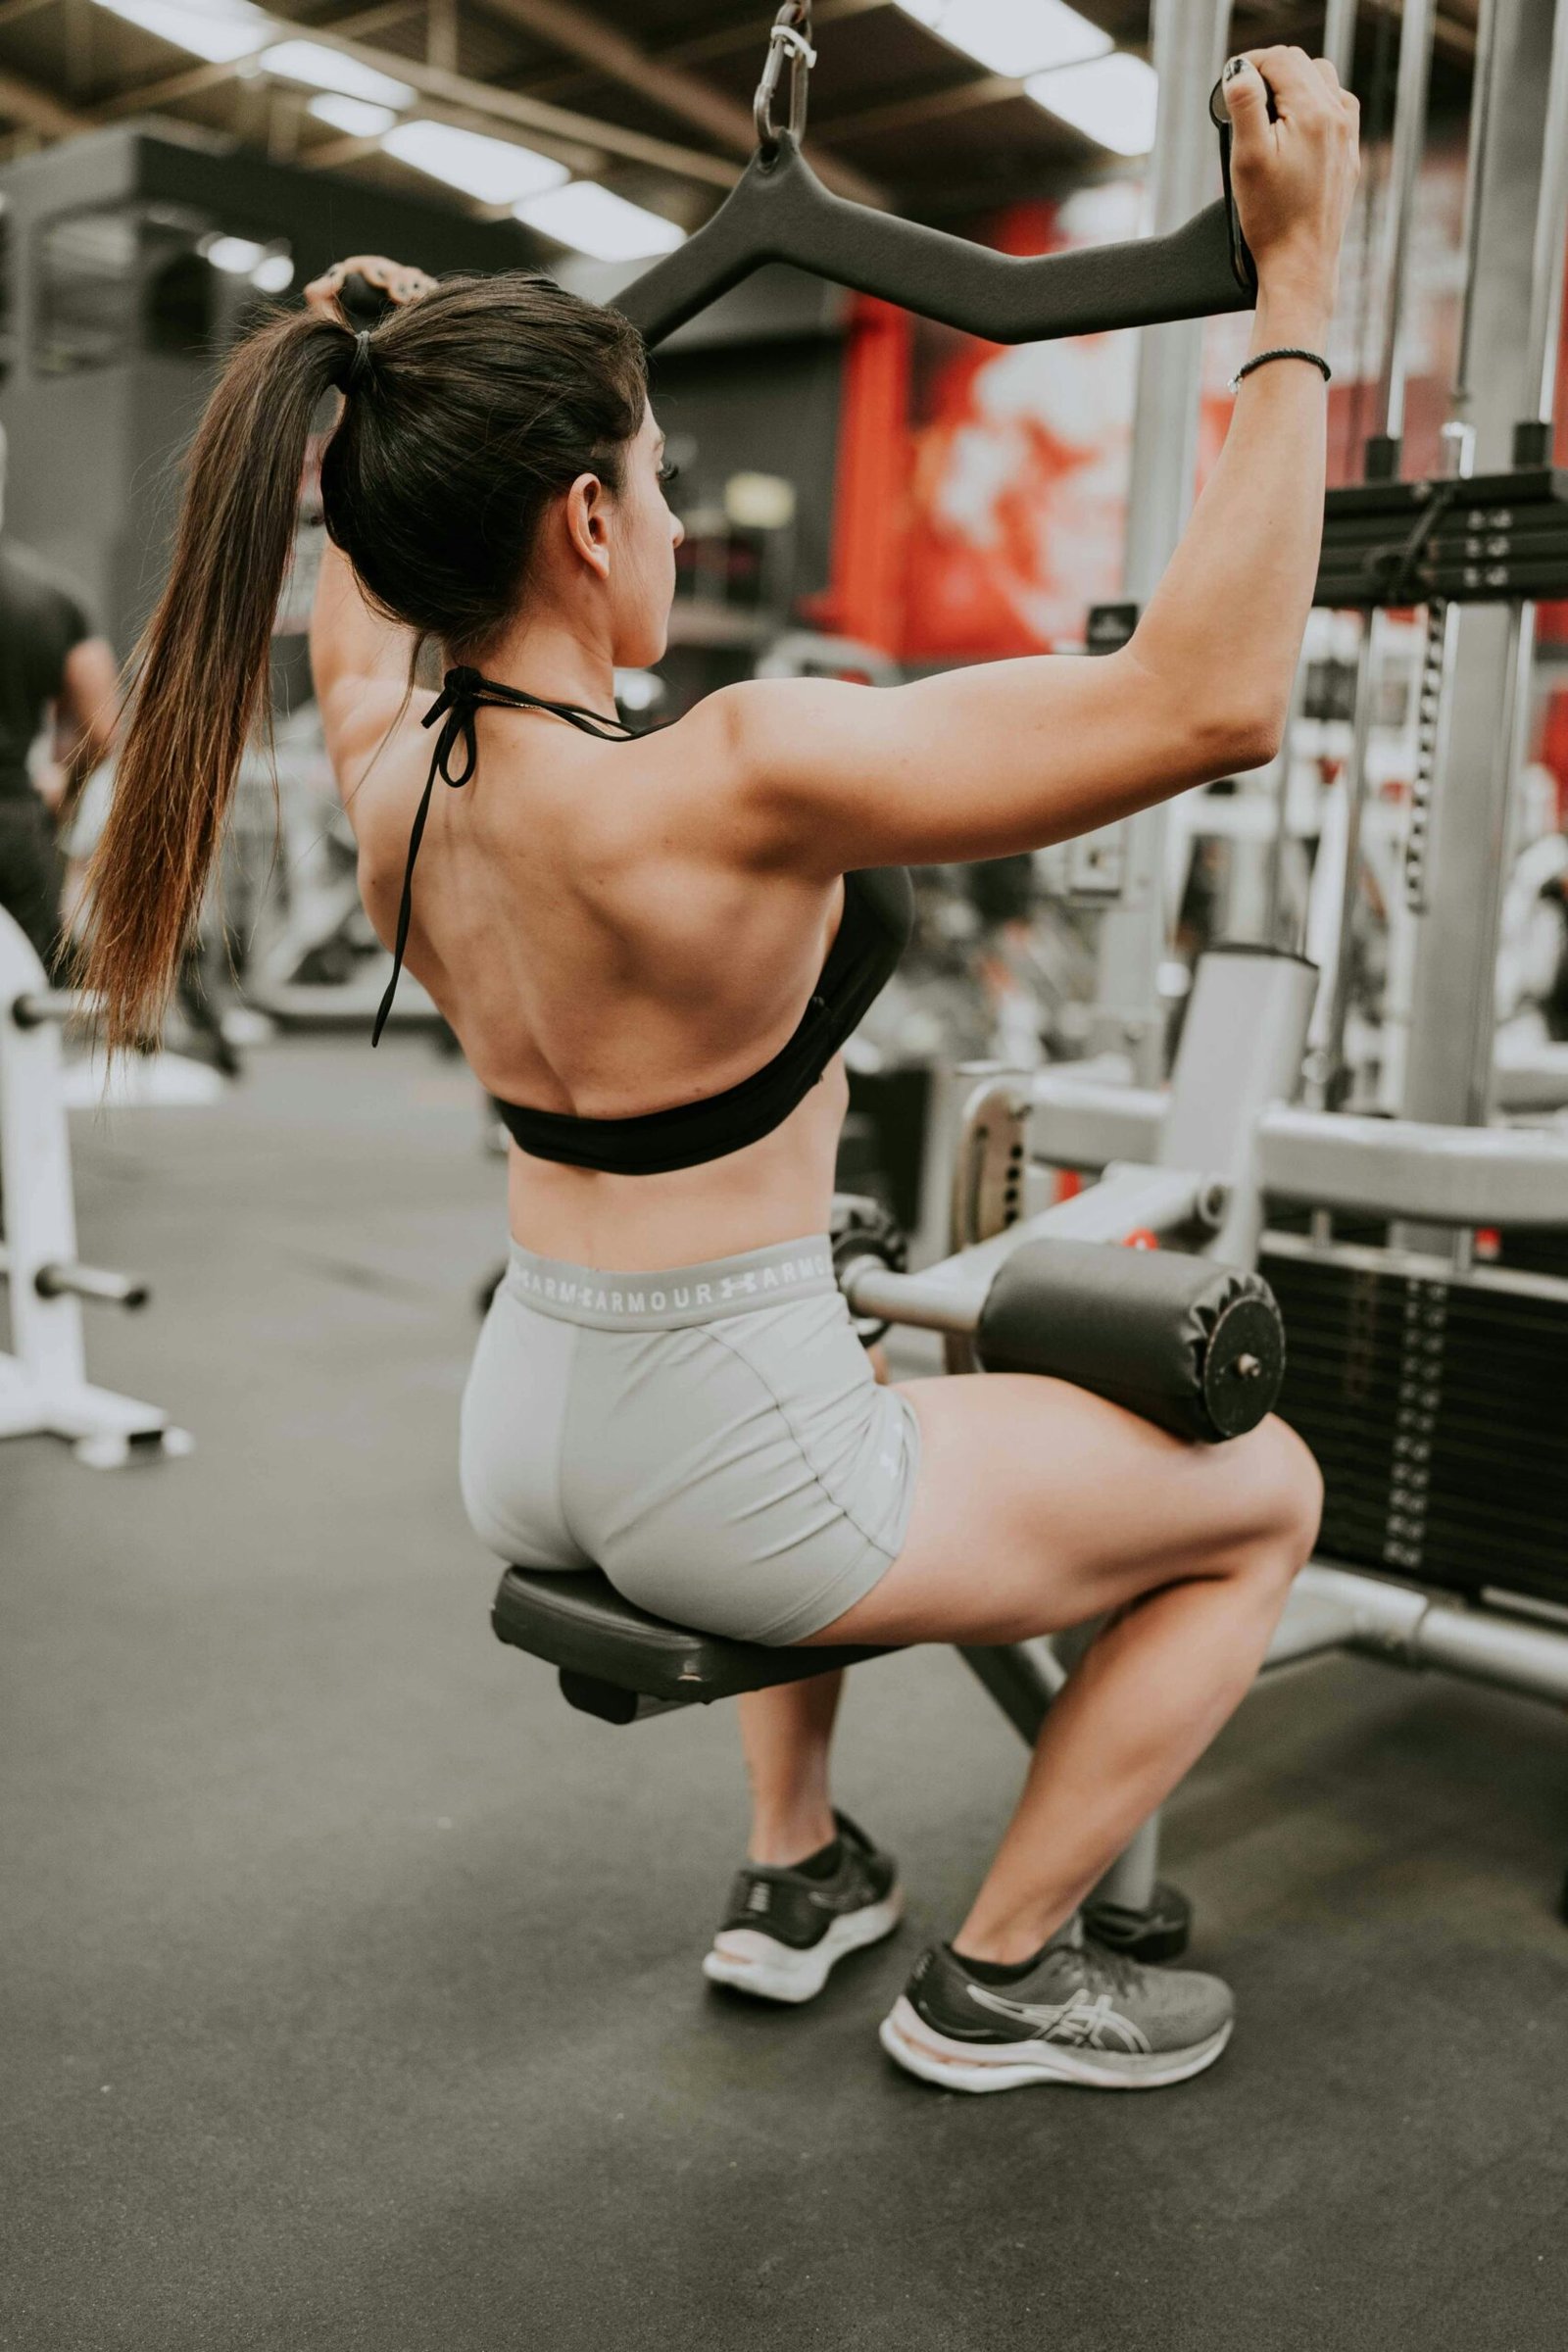 girl doing a back exercise called lat pulldowns